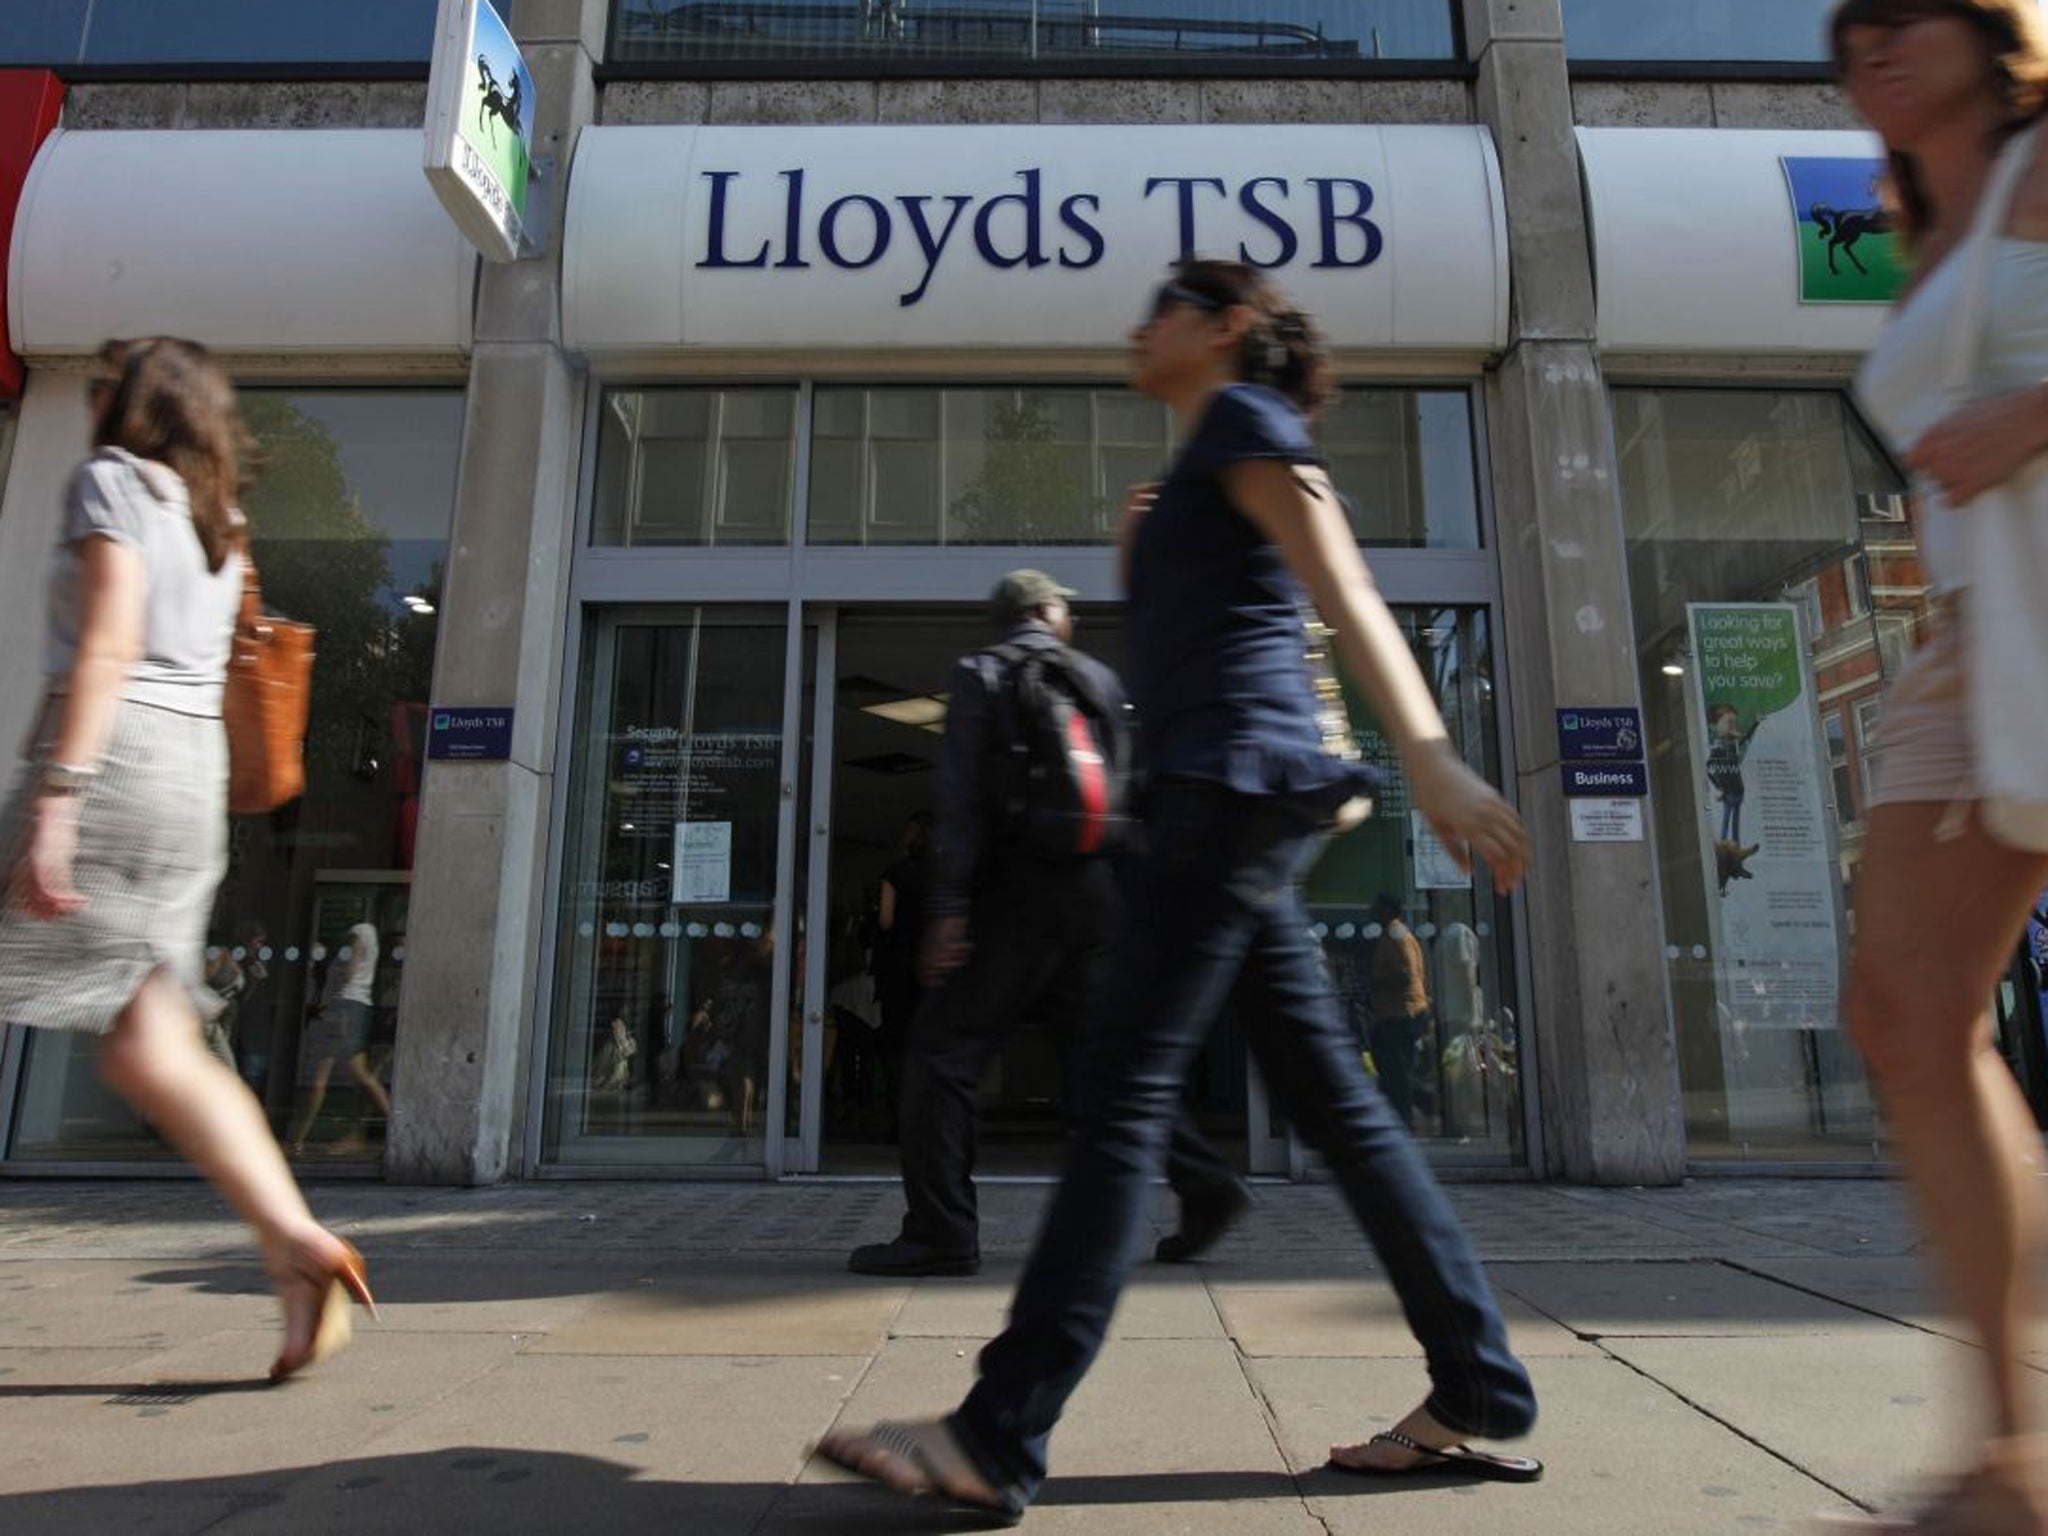 Most Lloyds customers who go into overdraft will benefit from its move on charges